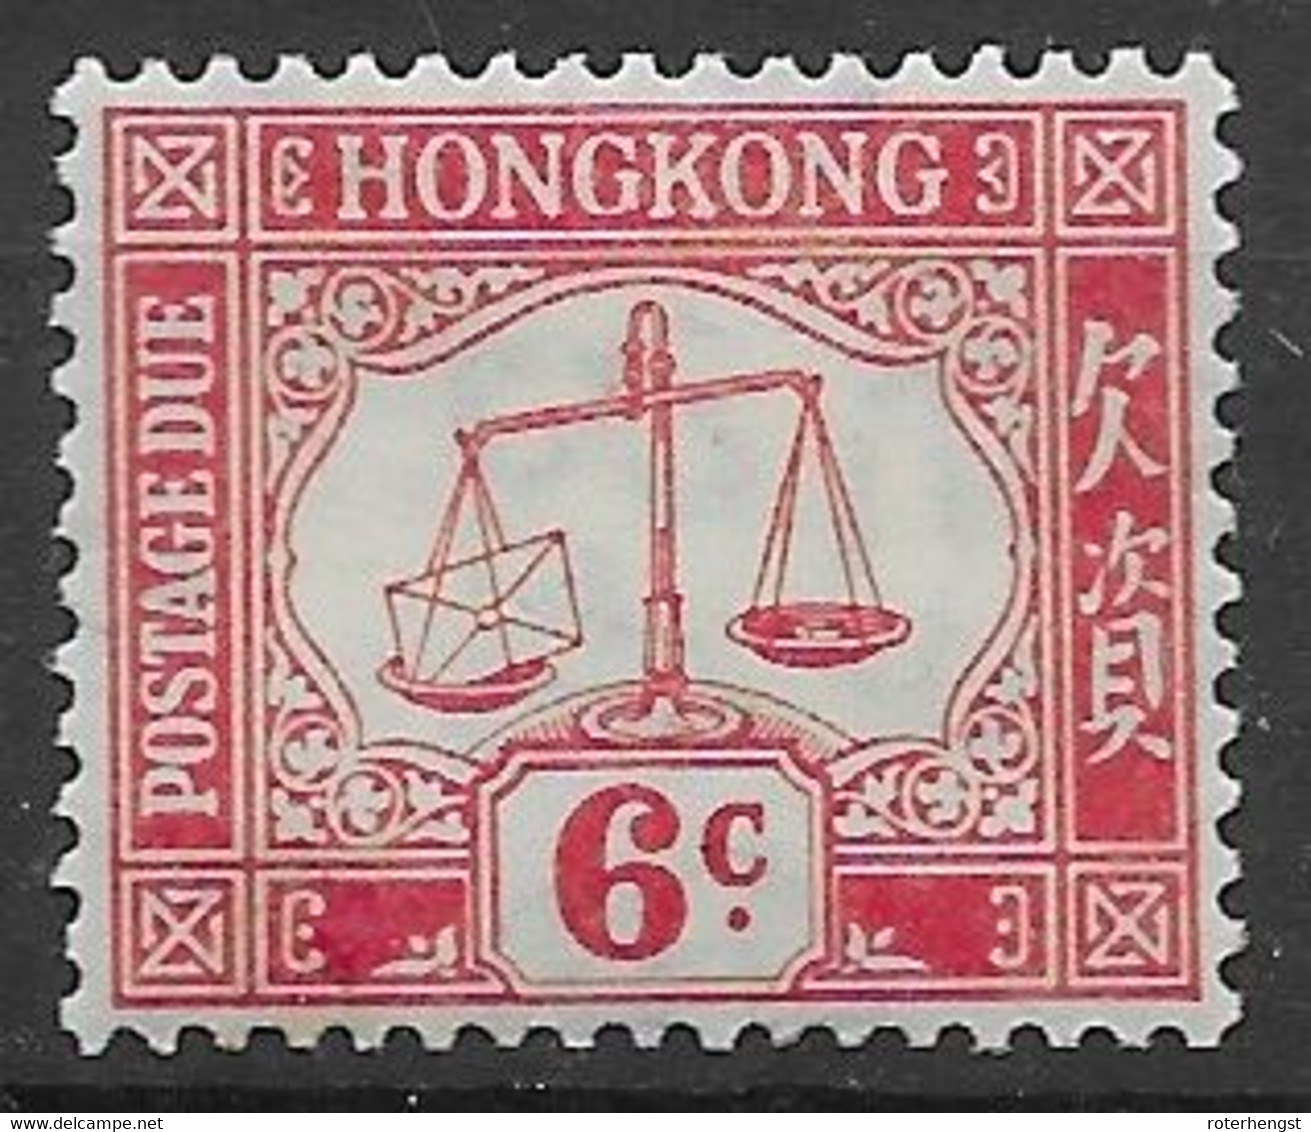 Hong Kong Postage Due Mh * 1938 Simple Paper 14 Euros - Postage Due